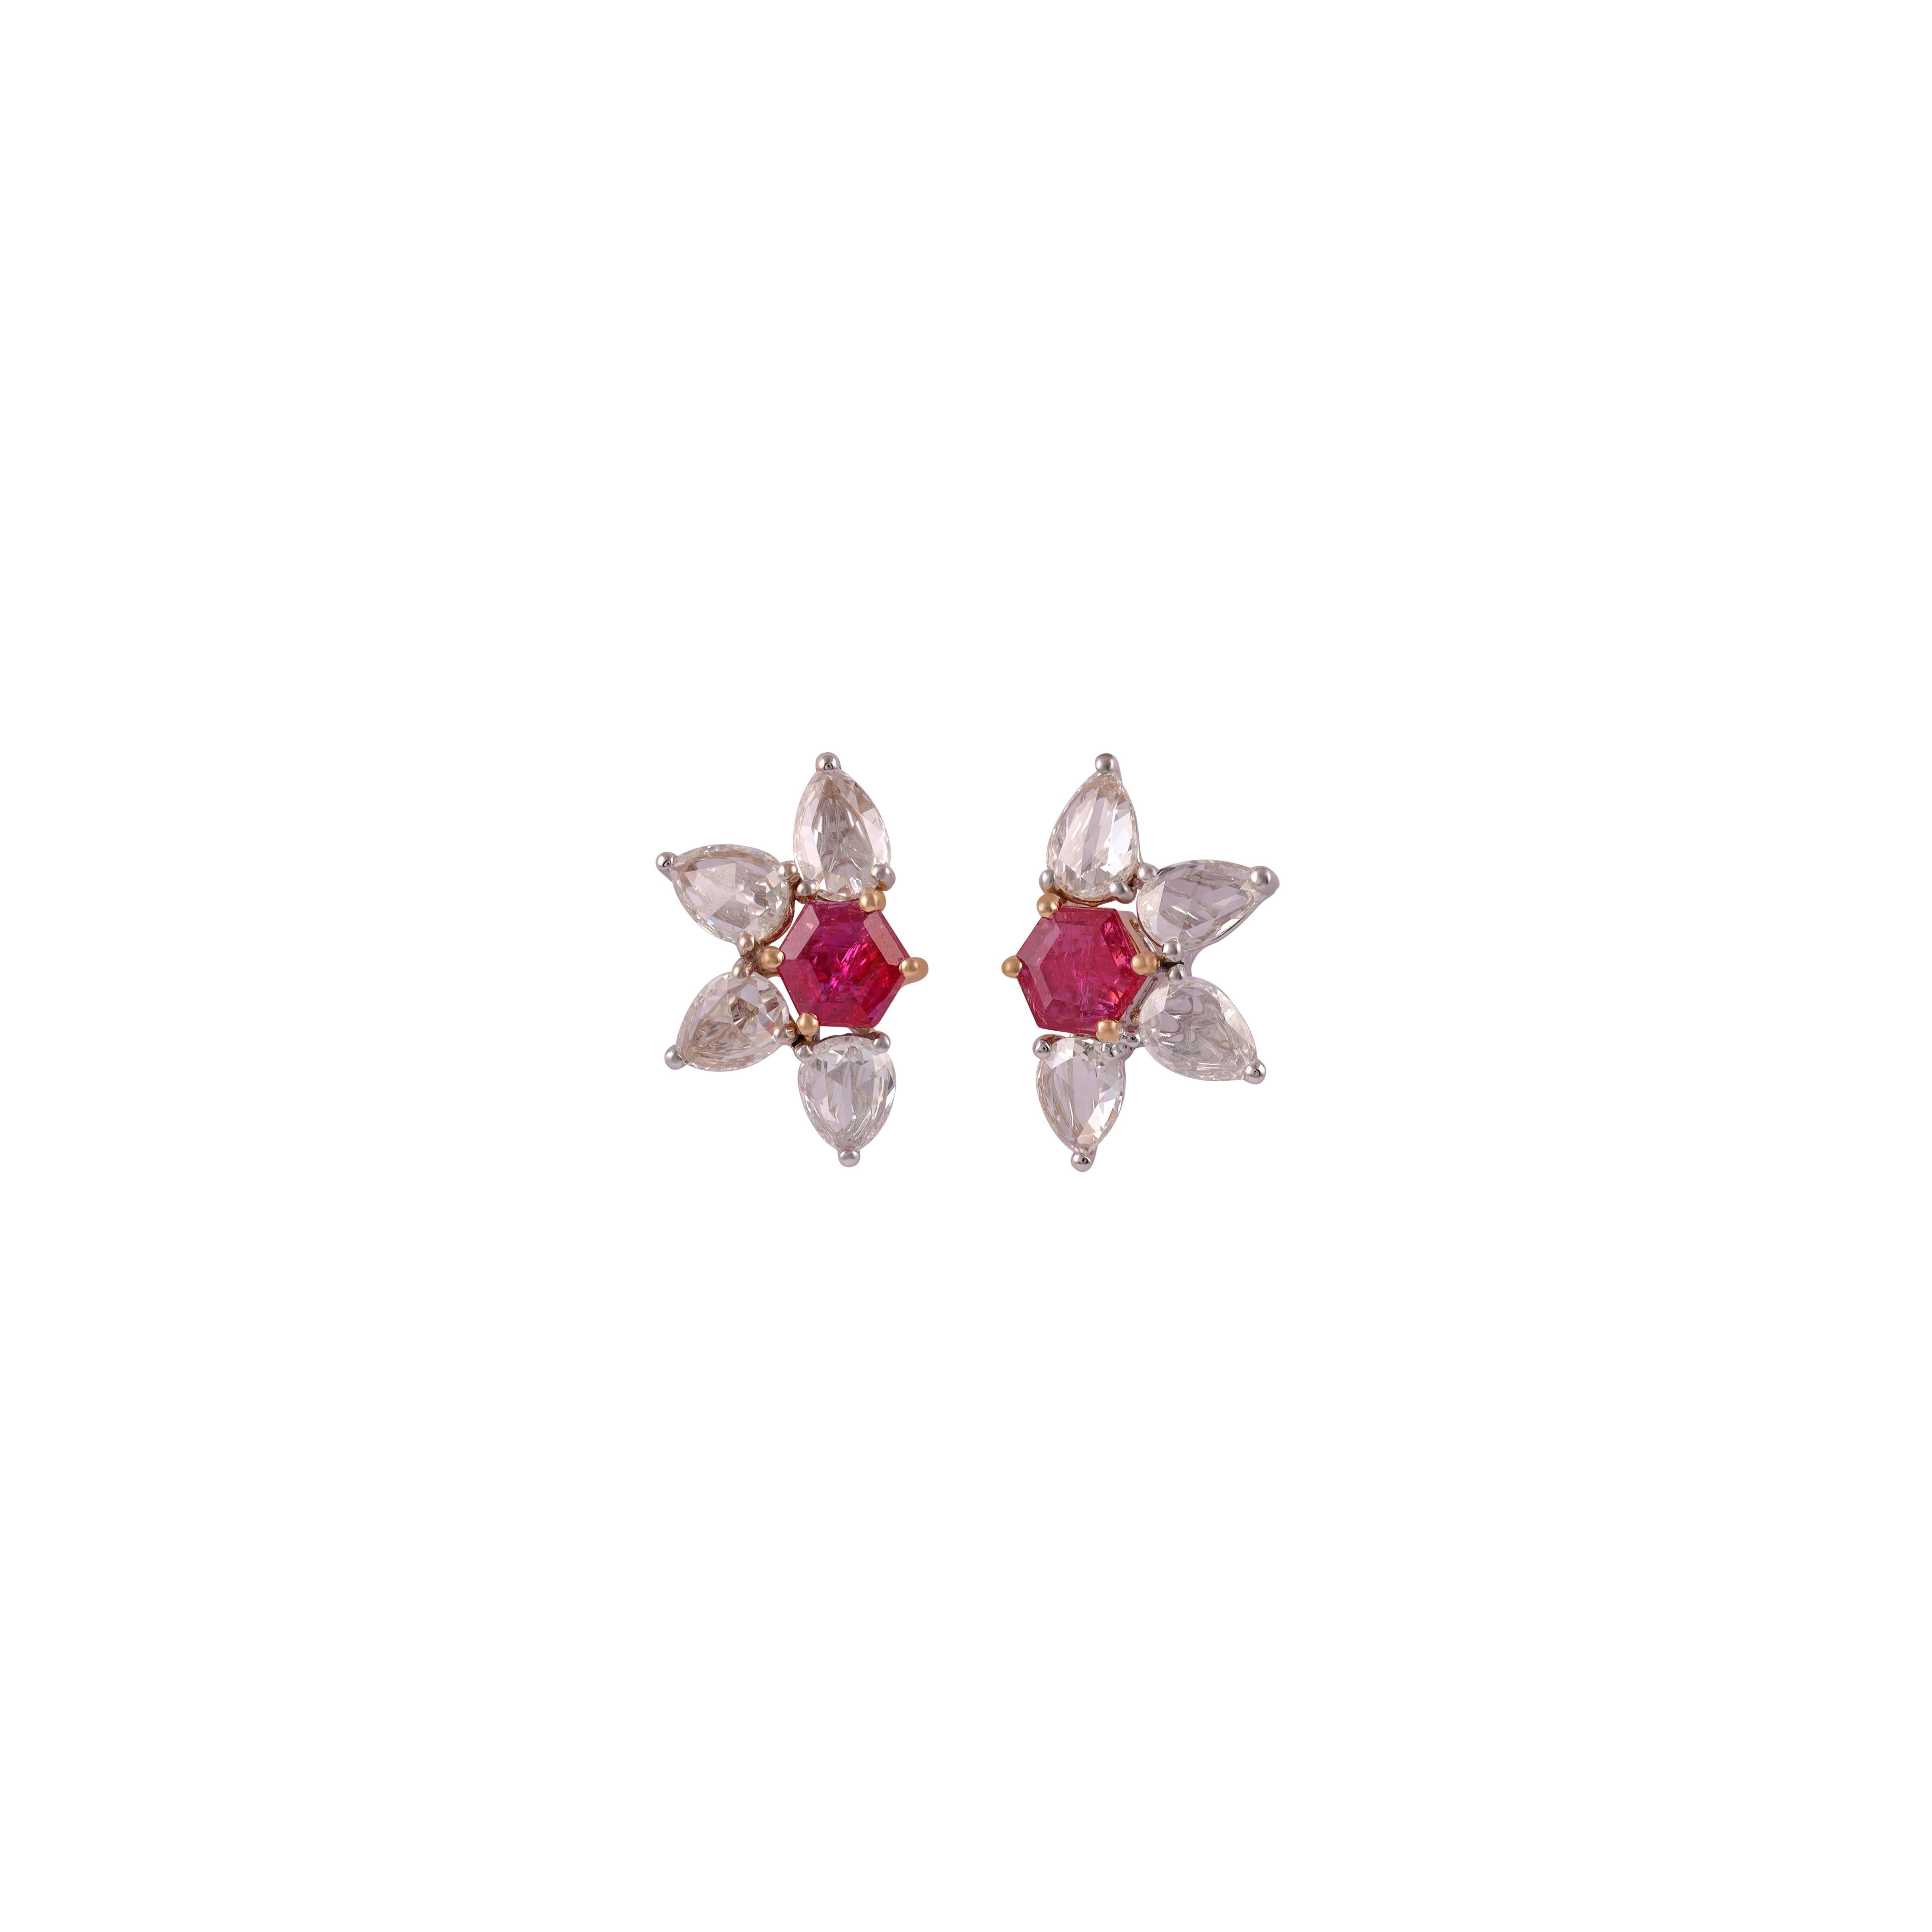 Magnificent Mozambique Ruby & Diamonds Stud Earrings
Mozambique Ruby approx. 0.99 CTS
8 Rose cut diamonds 1.47 CTS
18 k gold mounting 3.34 GMS

Custom Services
Request Customization